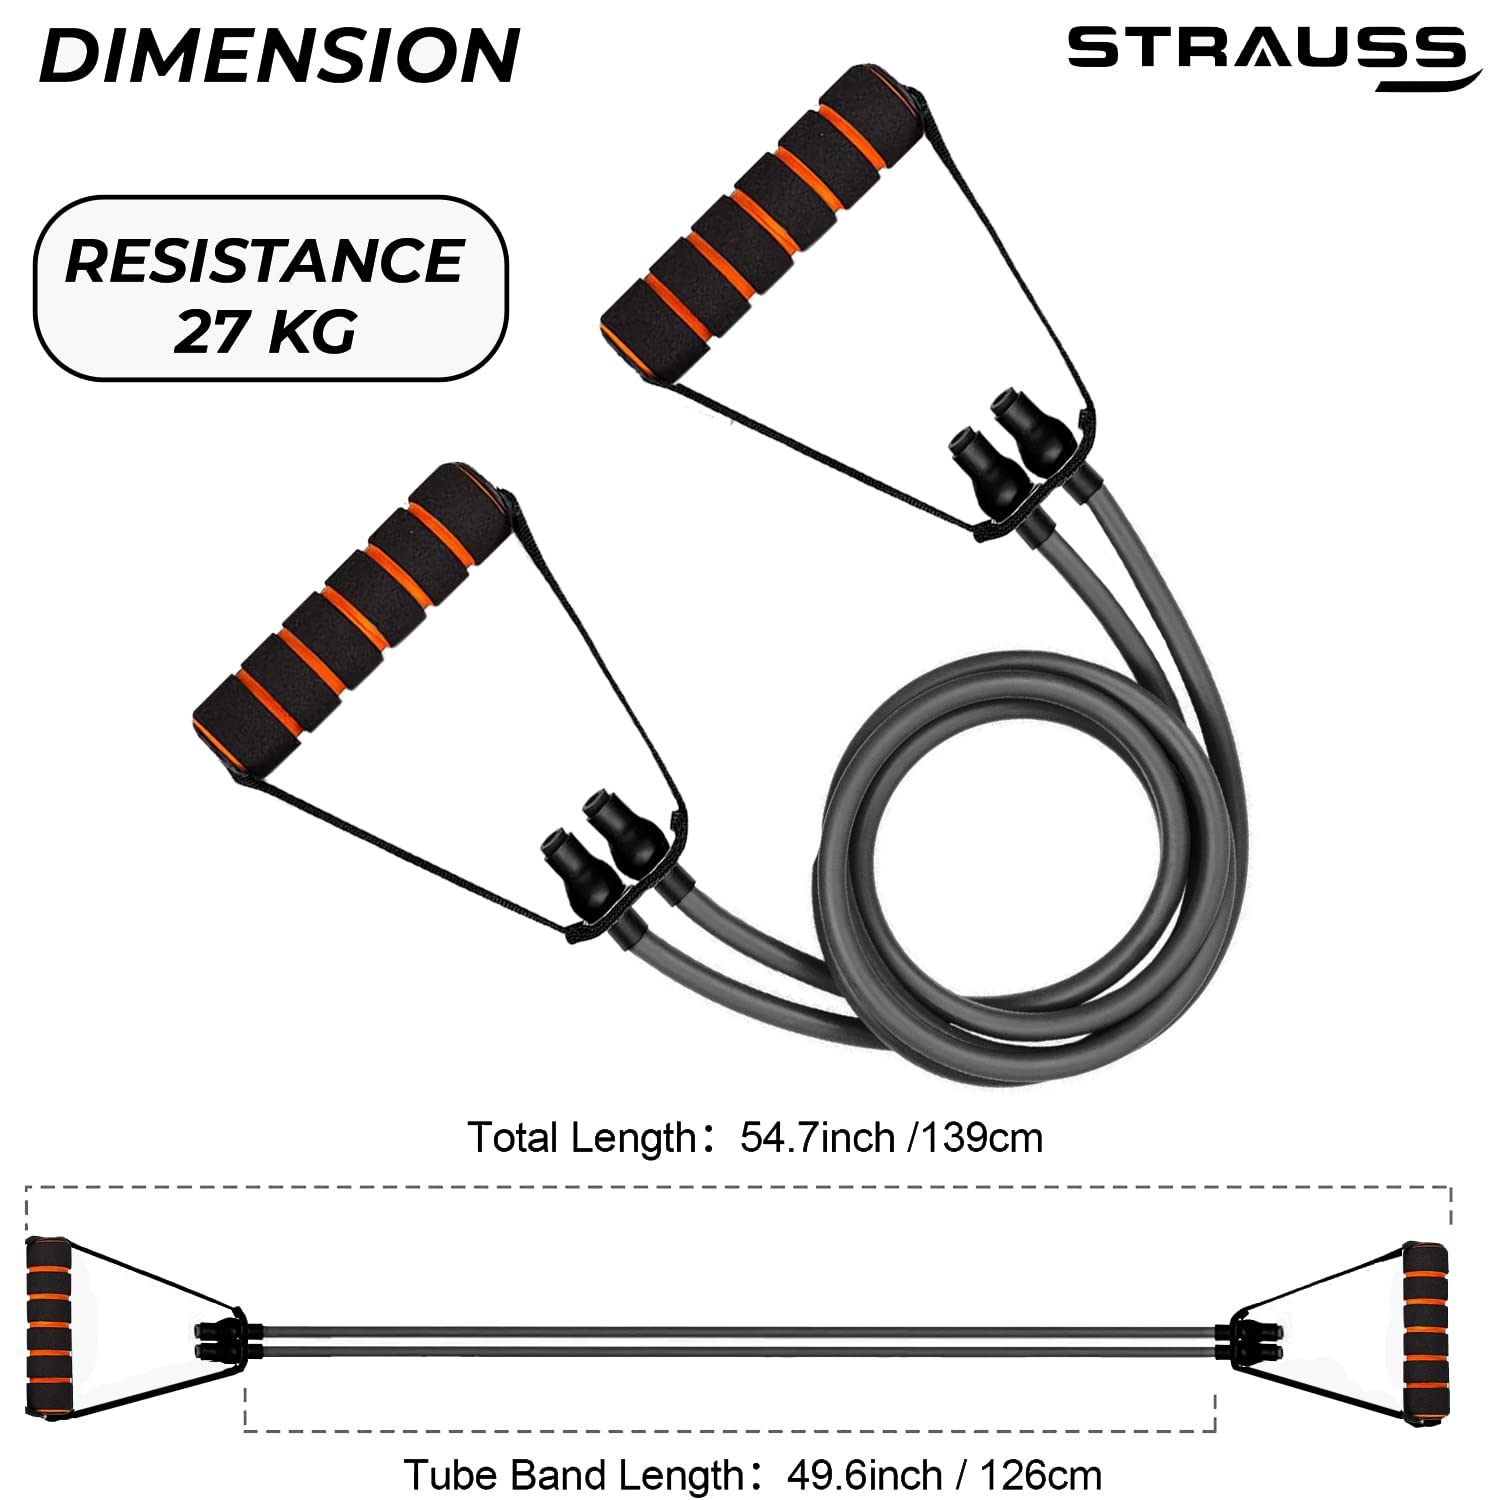 Strauss Double Resistance Tube with Foam Handles, Door Knob & Carry Bag, 27 Kg, (Black)